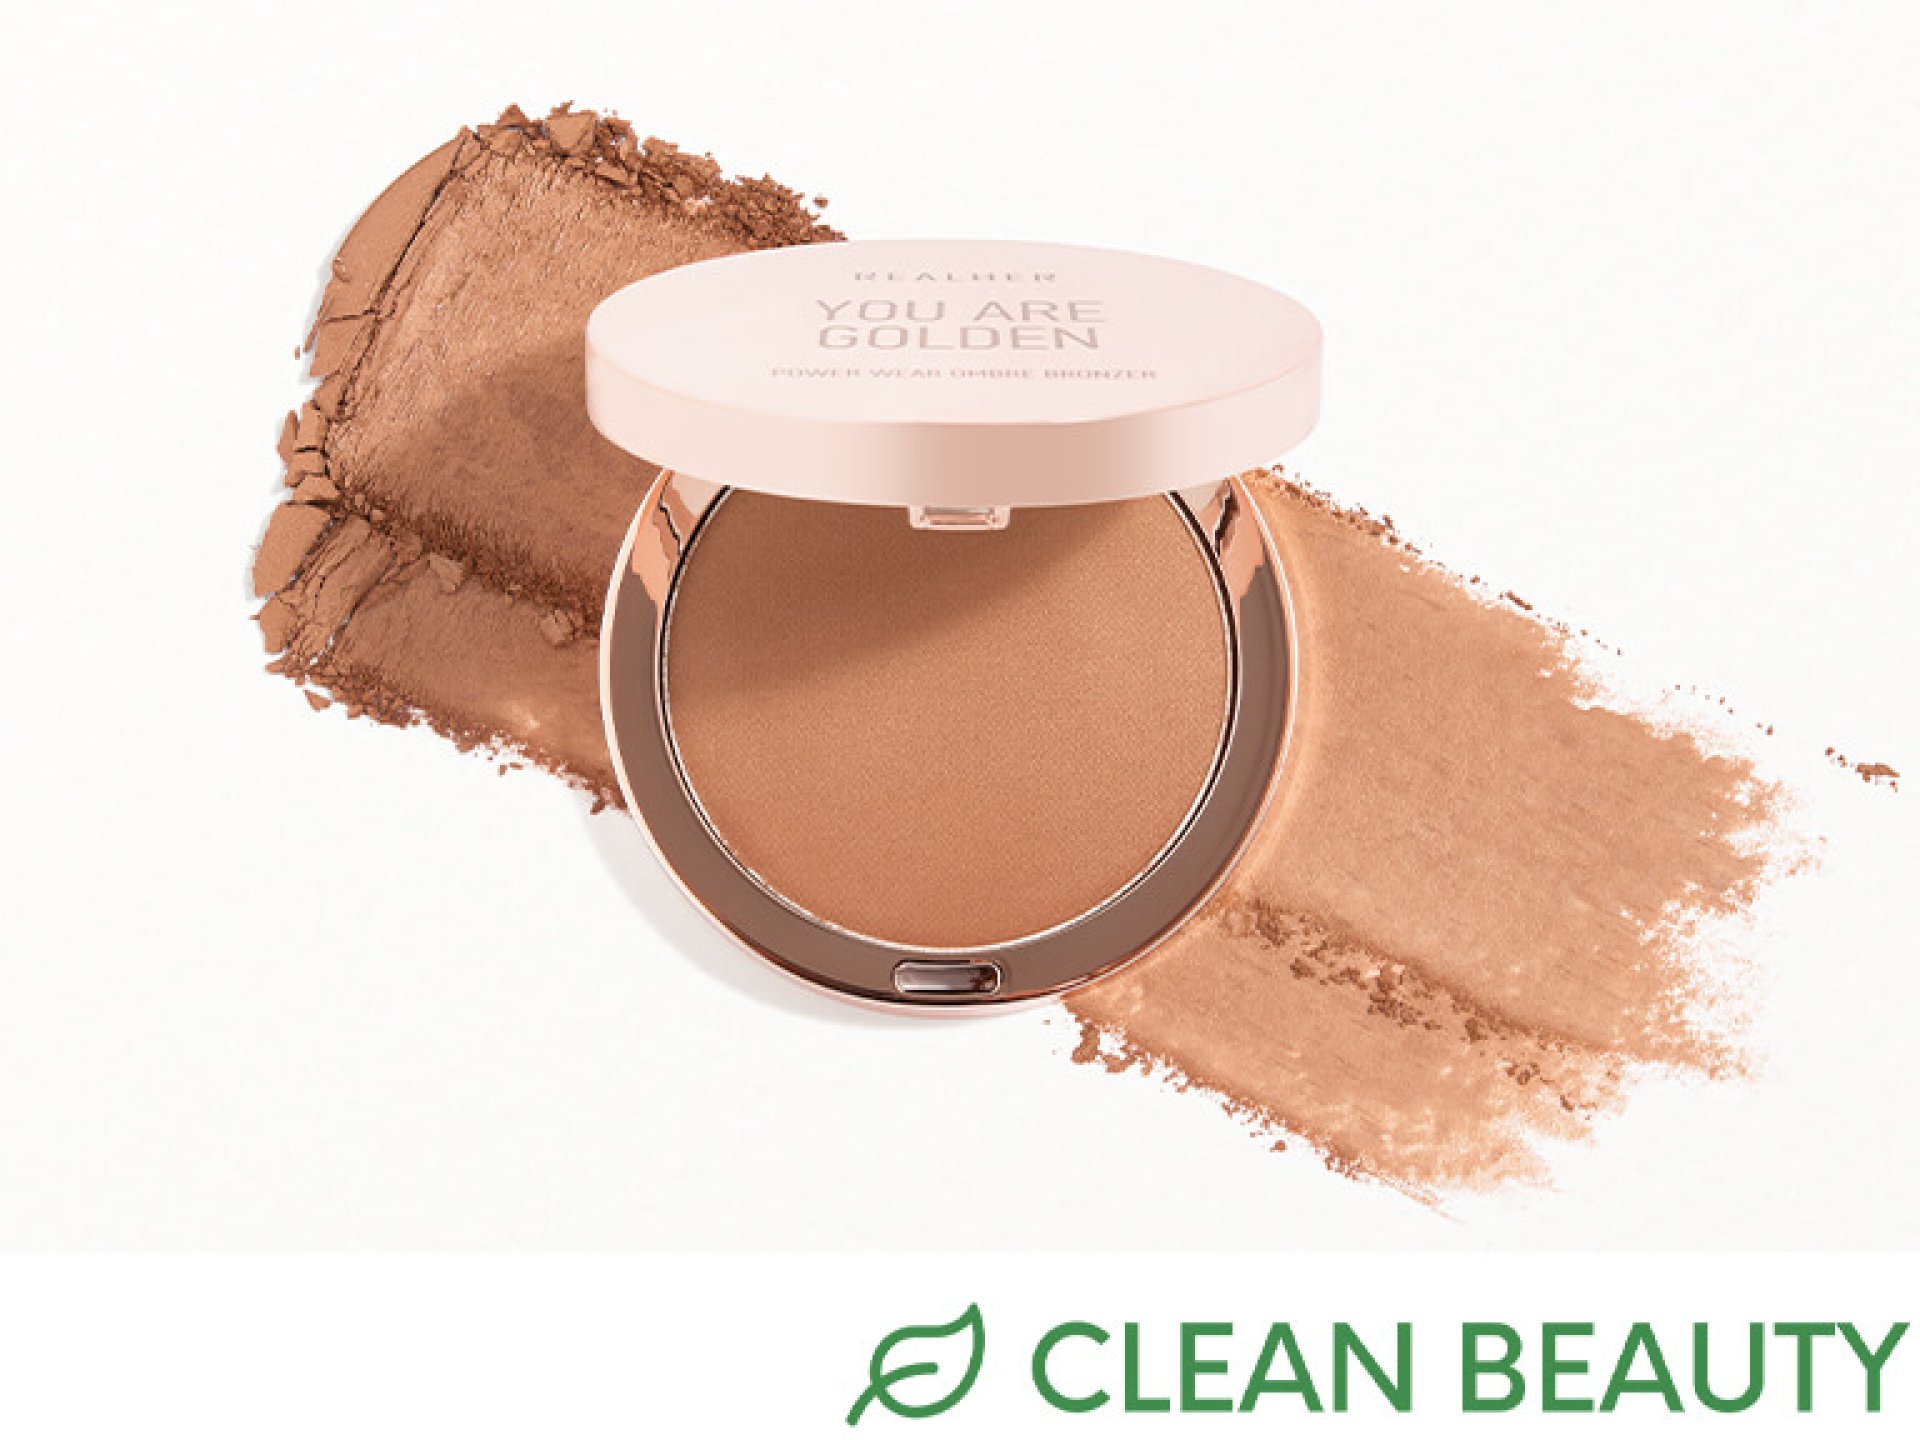 REALHER Power Wear Ombre Bronzer in You Are Golden (Full)